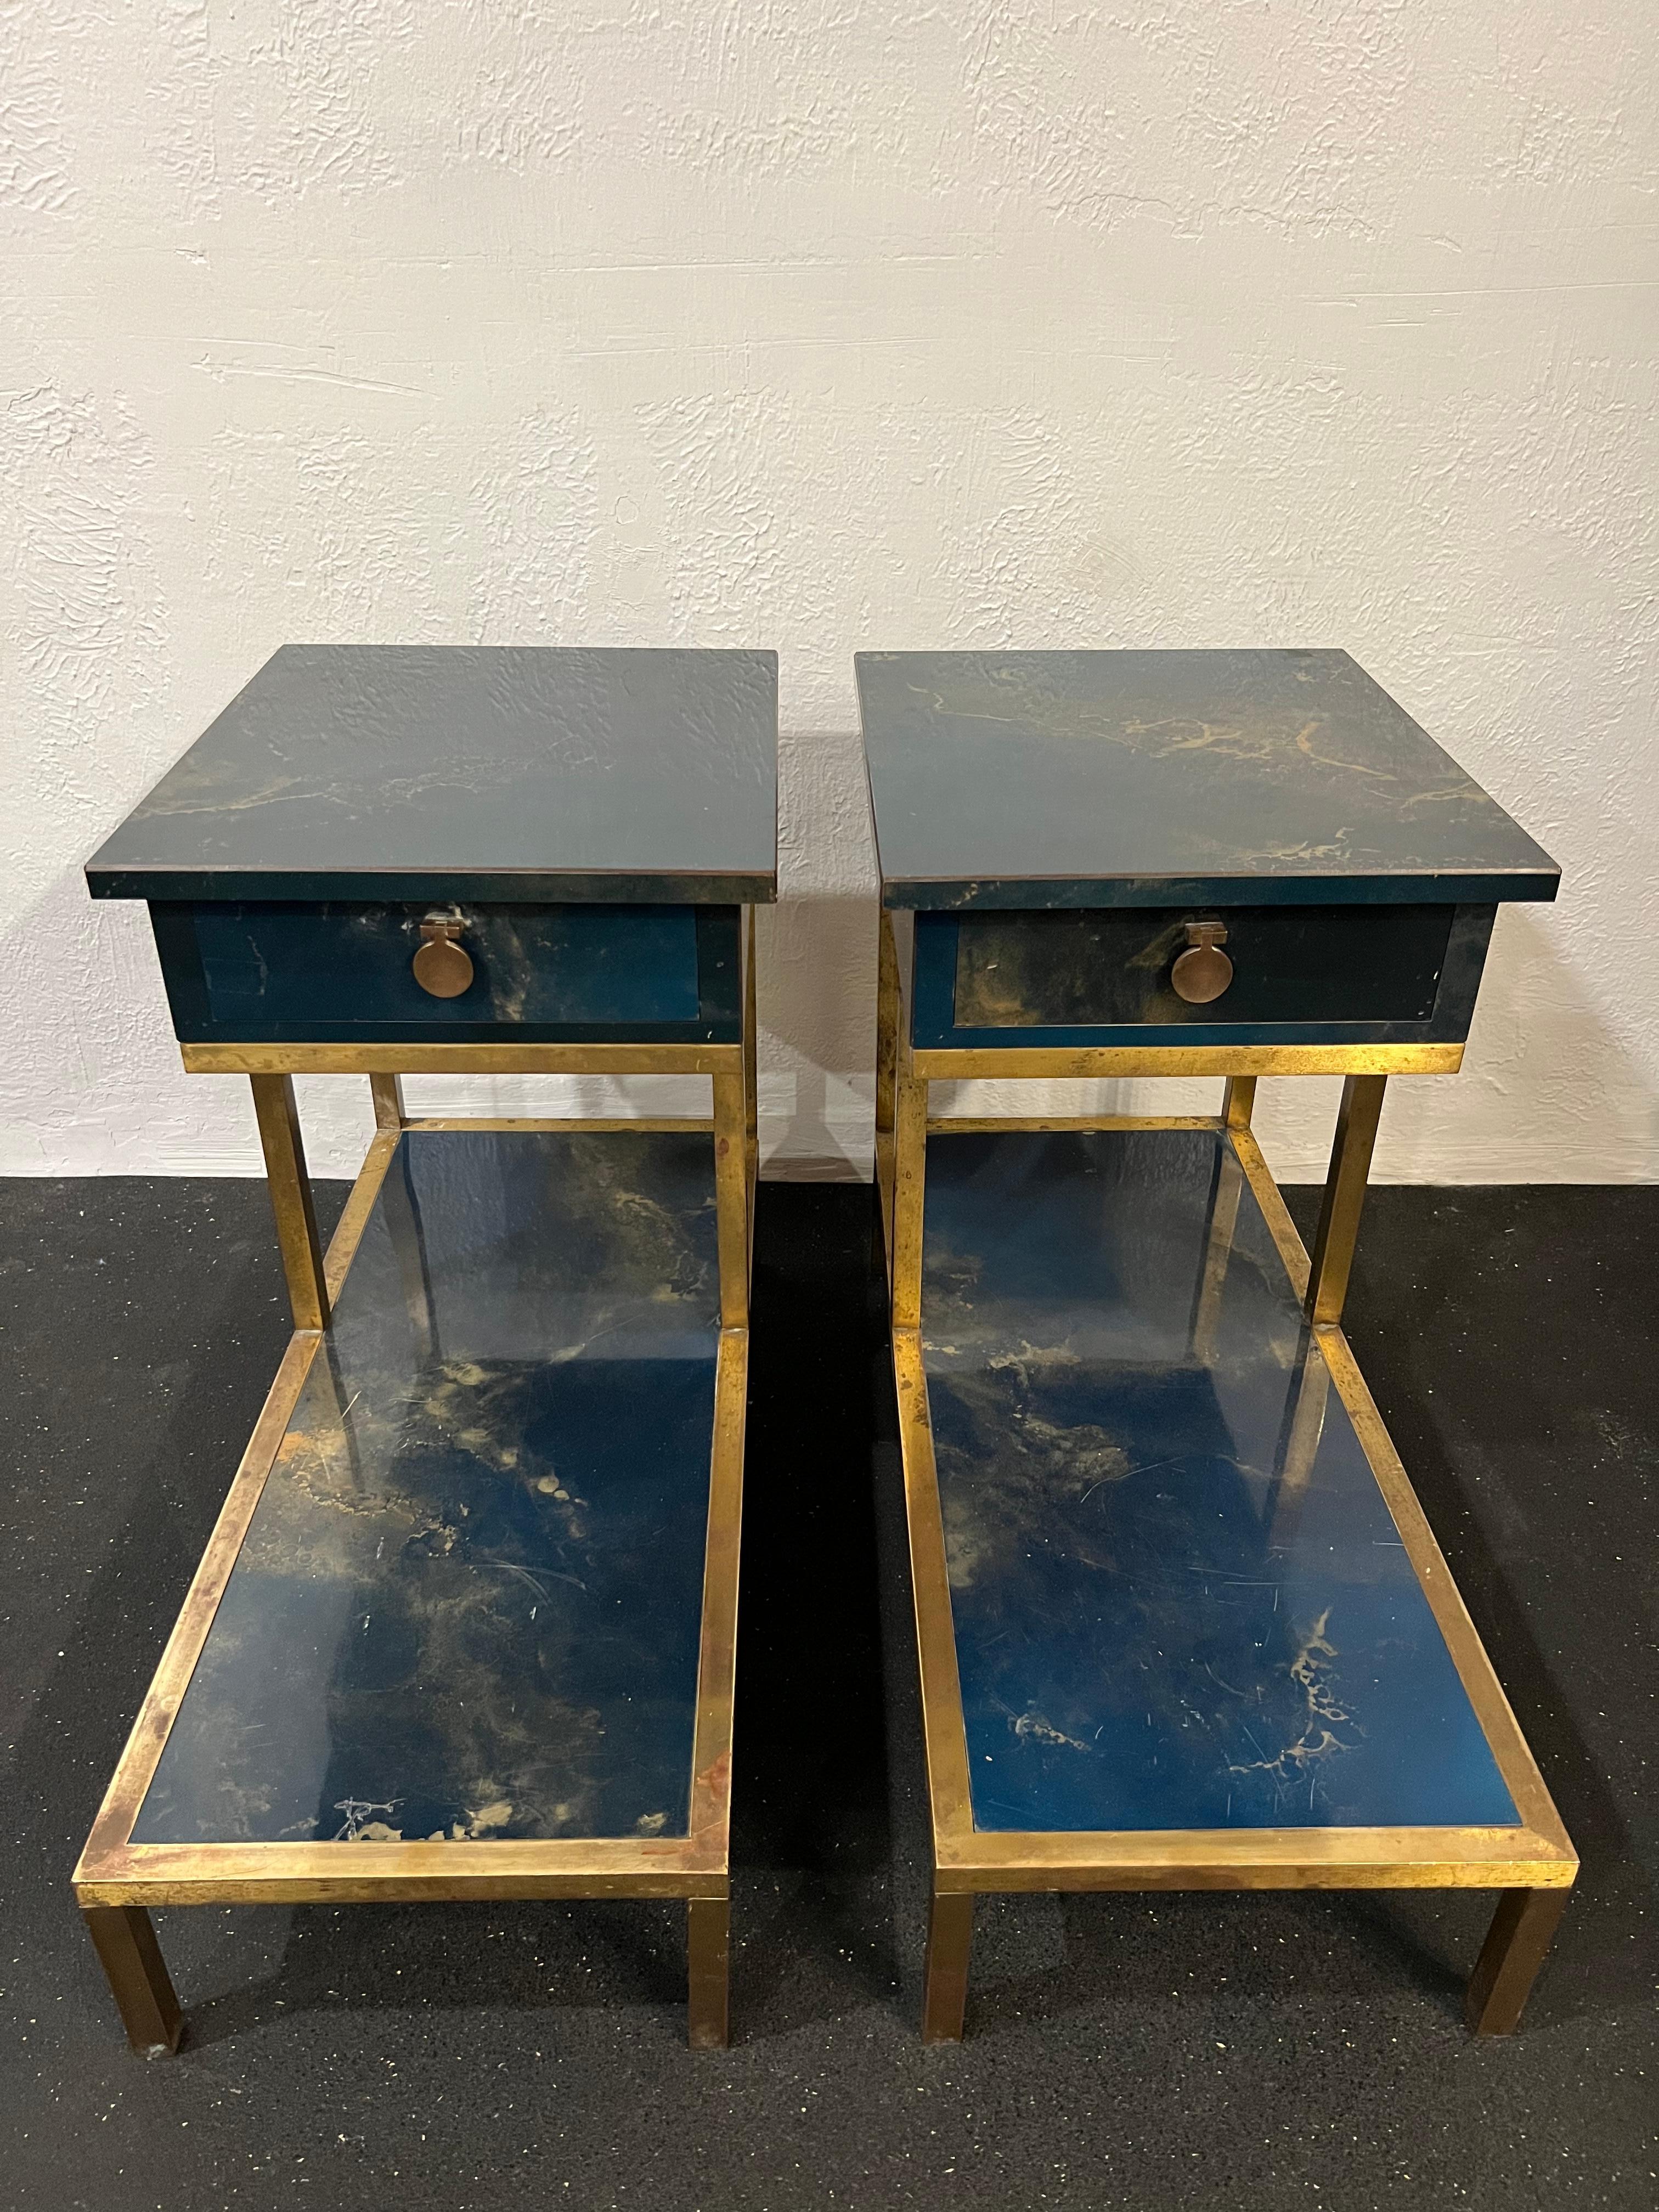 Pair of Guy Lefevre for Maison Jansen two-tiered lacquered and bronze tables. Rare examples that are unique to the market. Beautiful patina to the bronze found in the original state. Marbleized painted finish in blue and gold tones. Surface wear